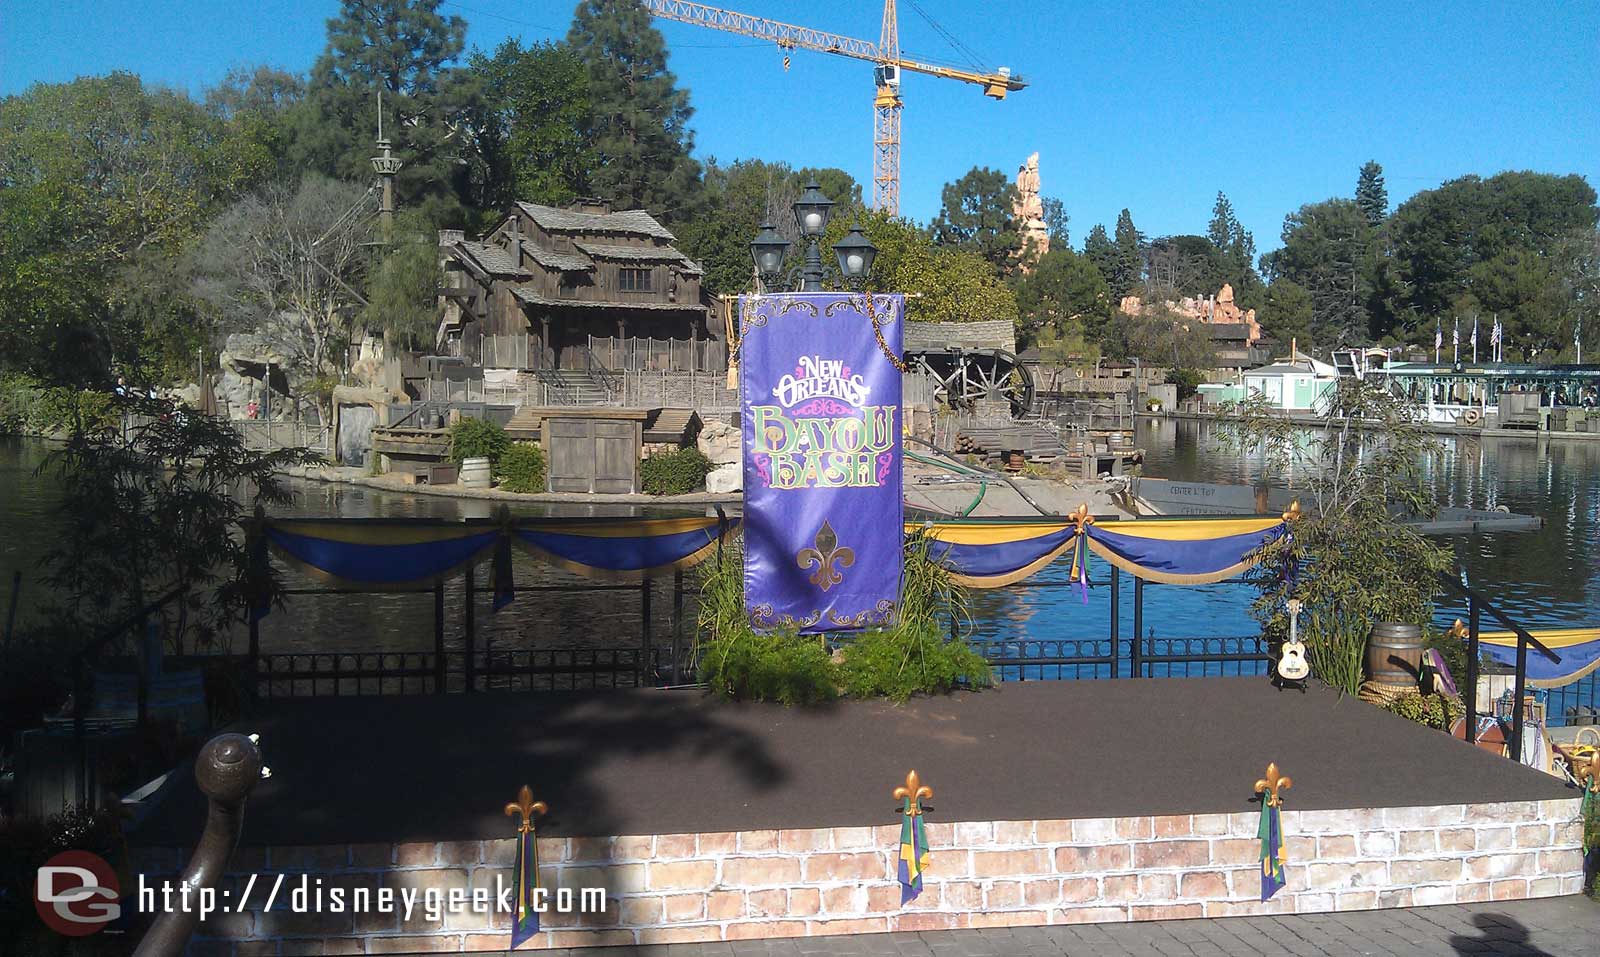 The New Orleans Bayou Bash started its LimitedTimeMagic run today.